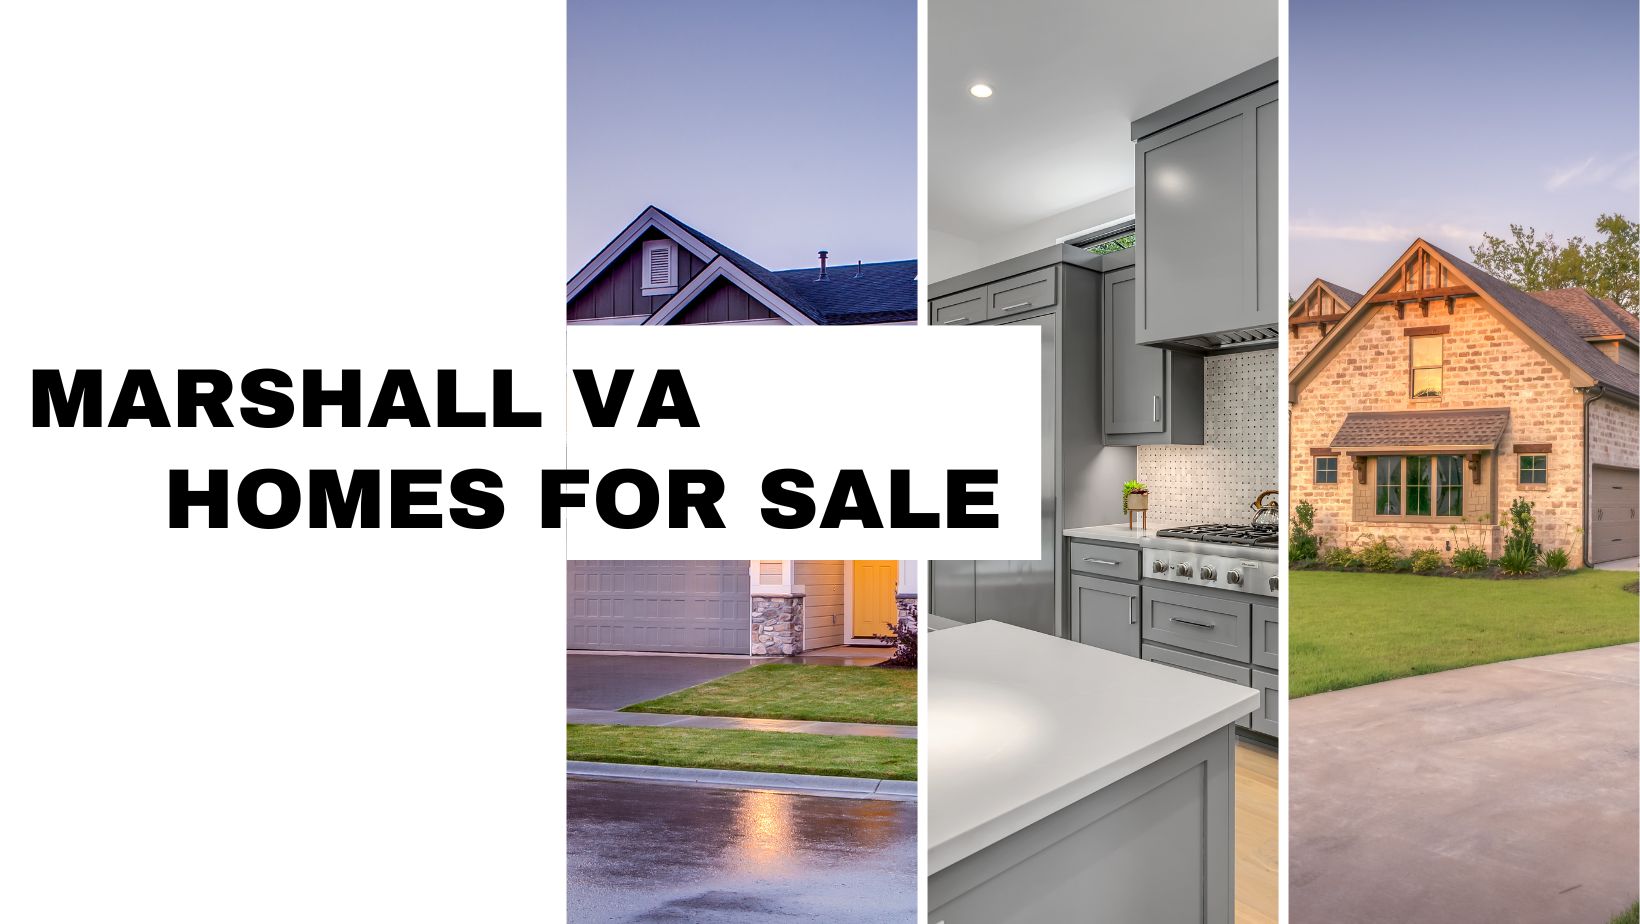 Marshall VA Homes for Sale Fauquier County